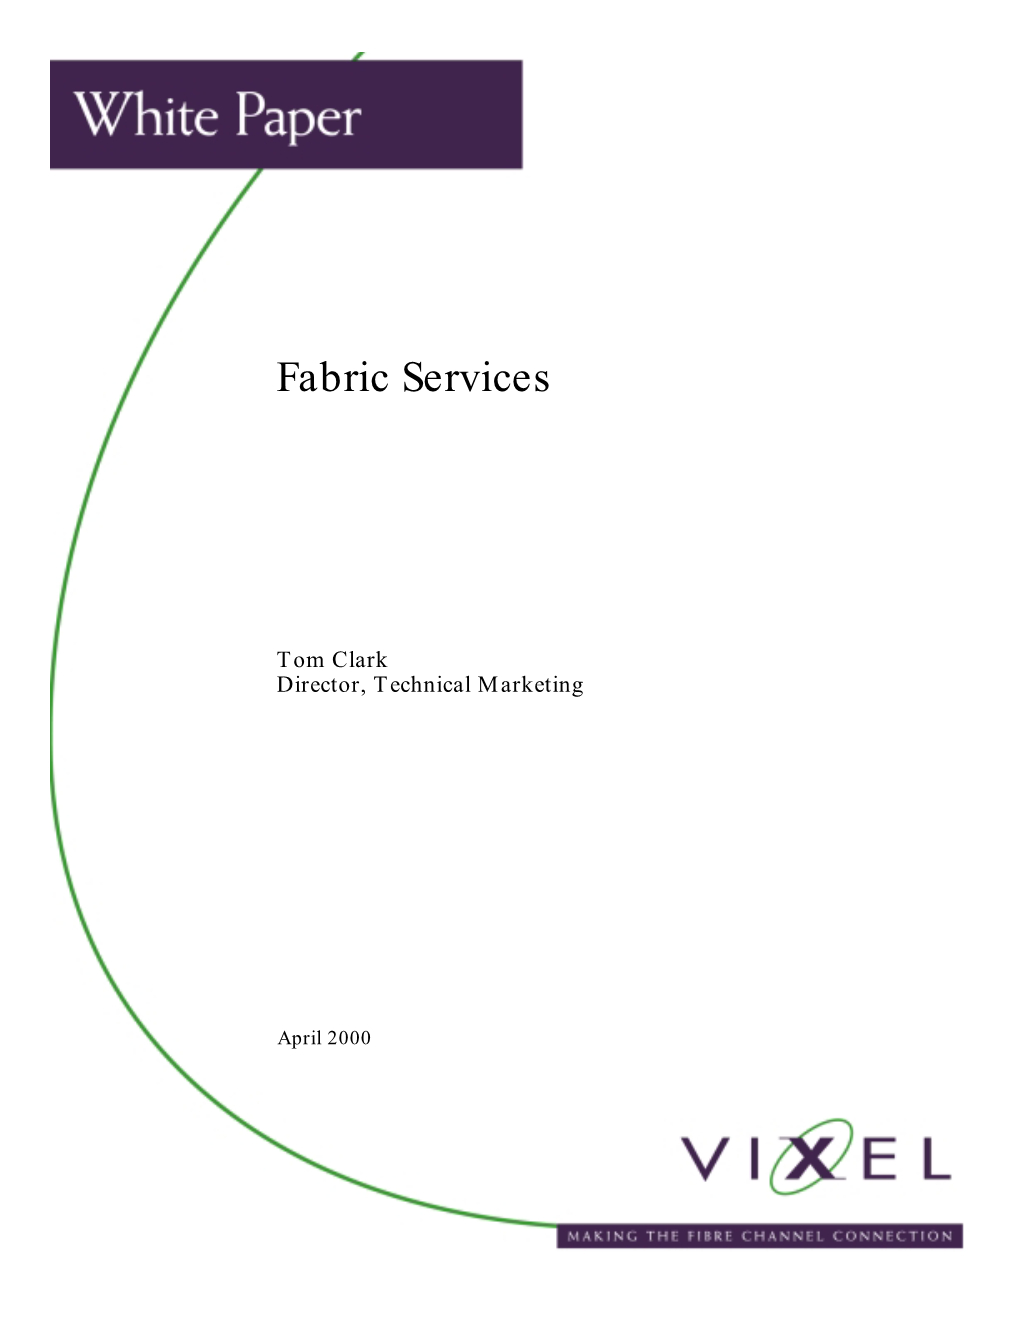 Fabric Services